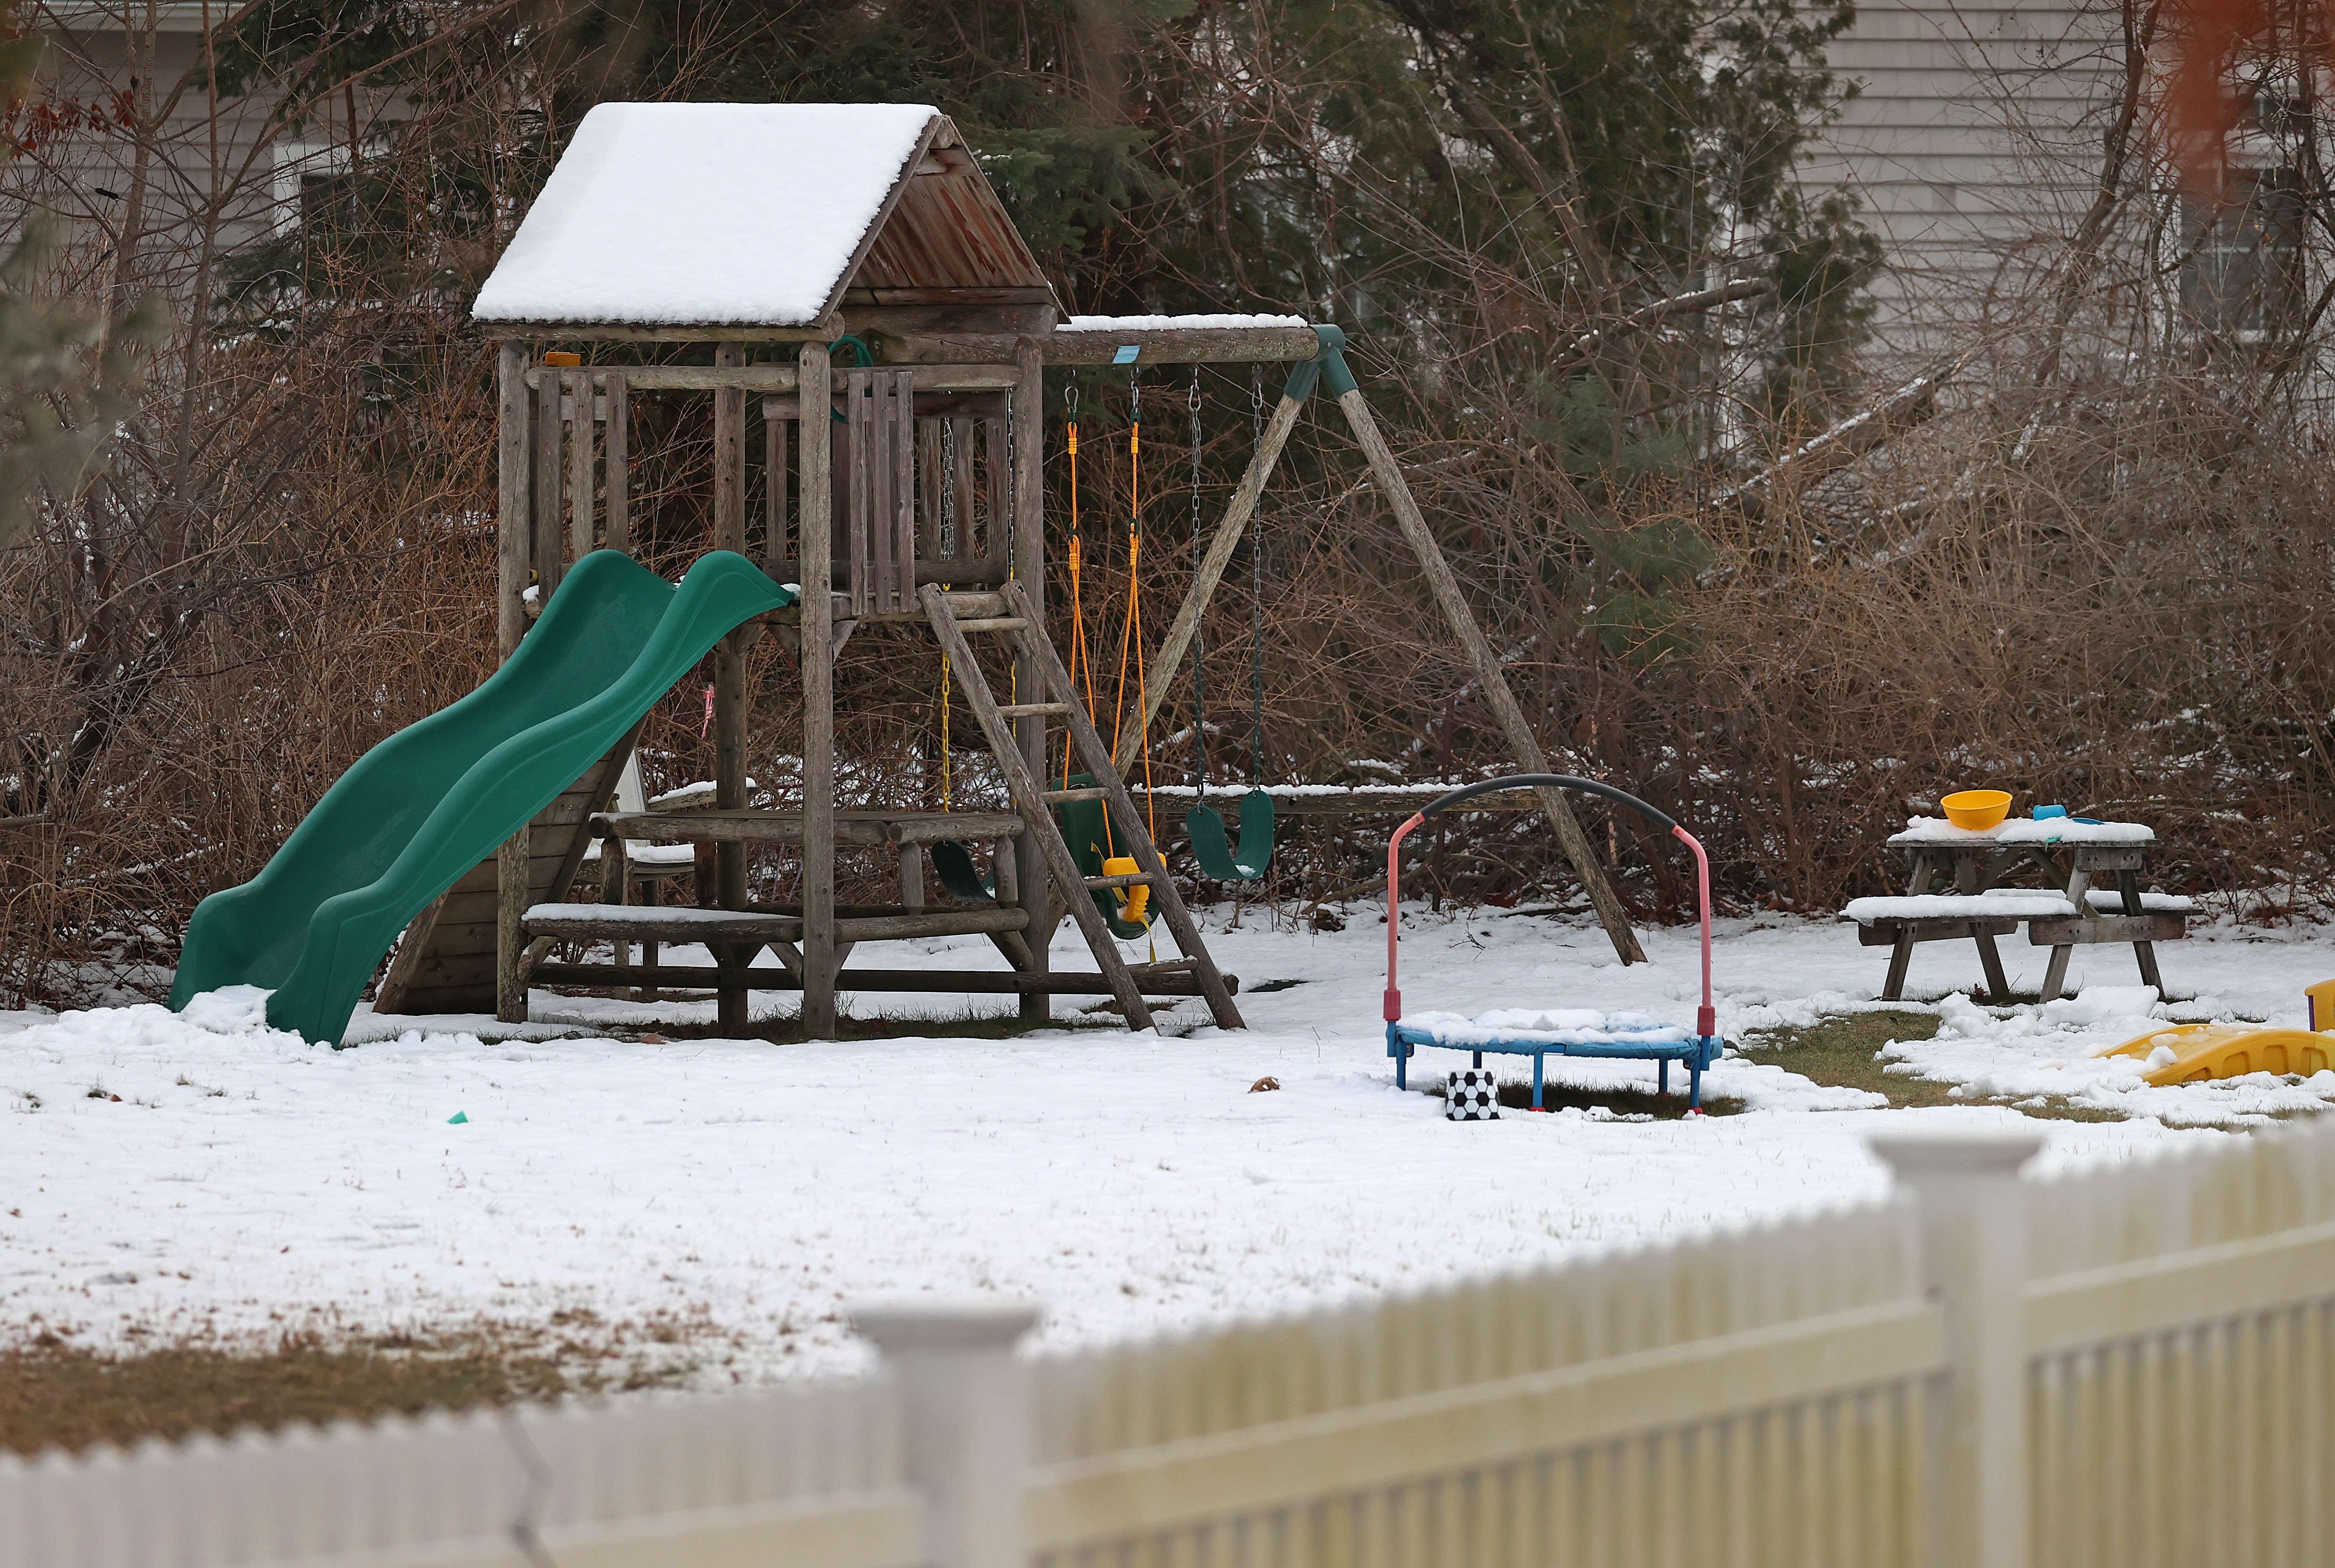 On January 25th, in Duxbury, MA, a man called the fire and police departments to report that a woman had attempted to kill herself at a residence where the bodies of two deceased children were discovered. The incident took place at a playground located on Summer Street, 47.